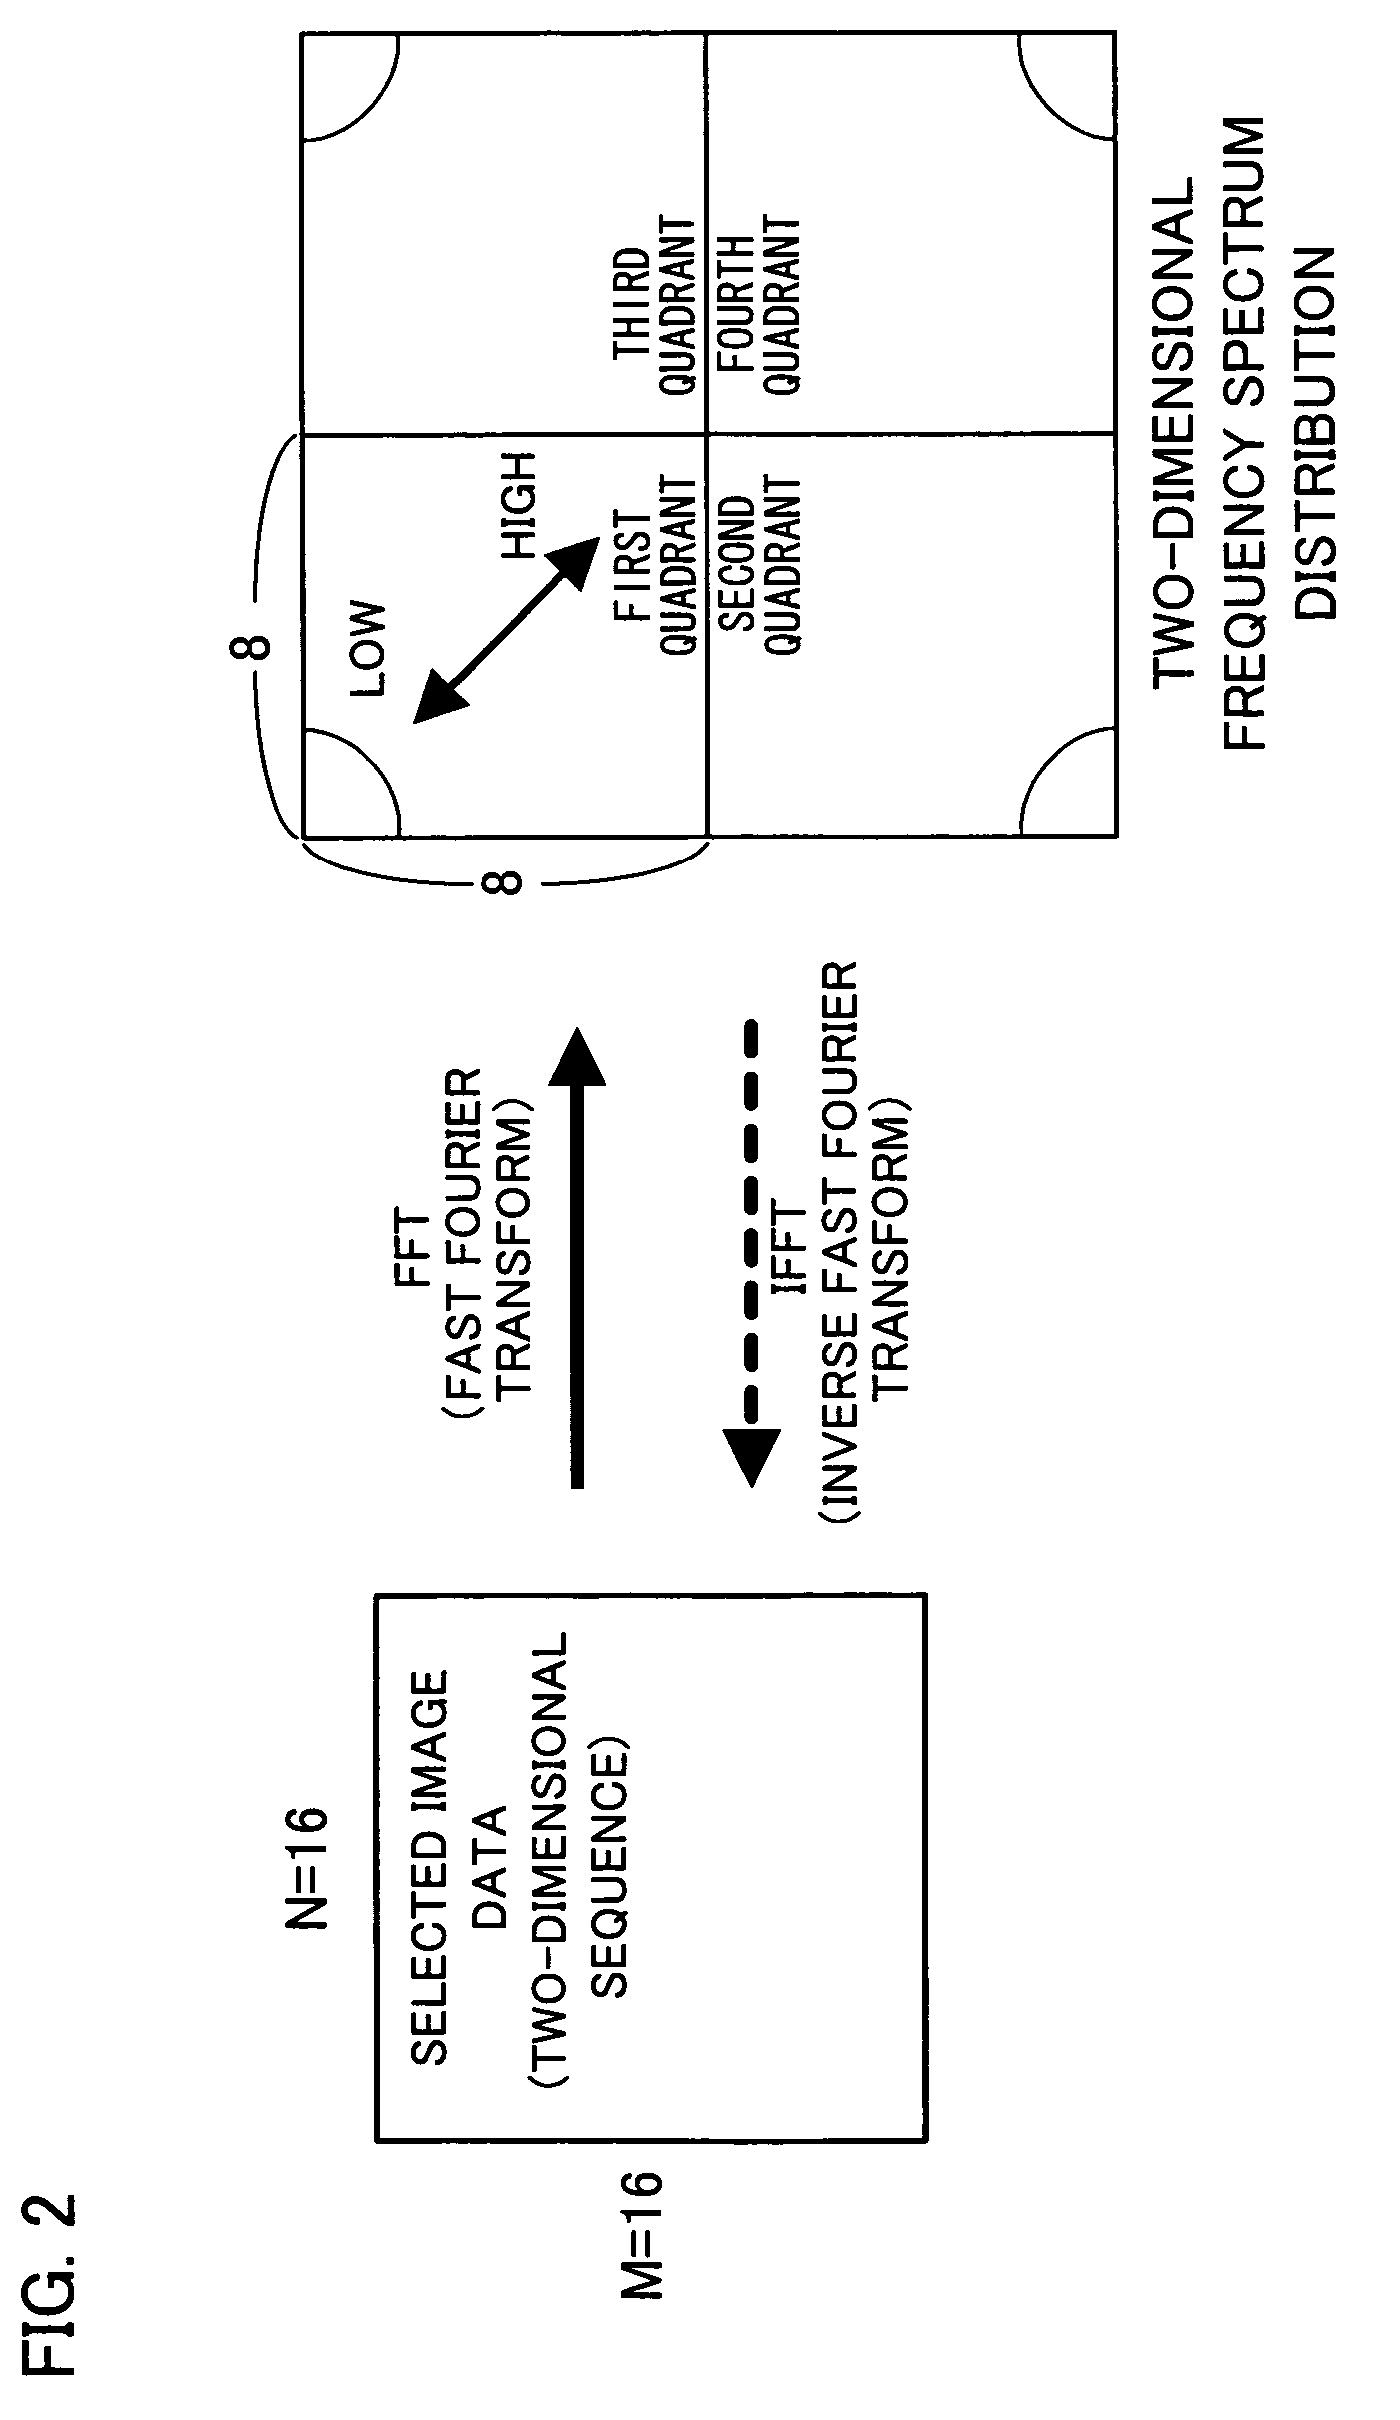 Image processing apparatus, image forming apparatus, and image processing method